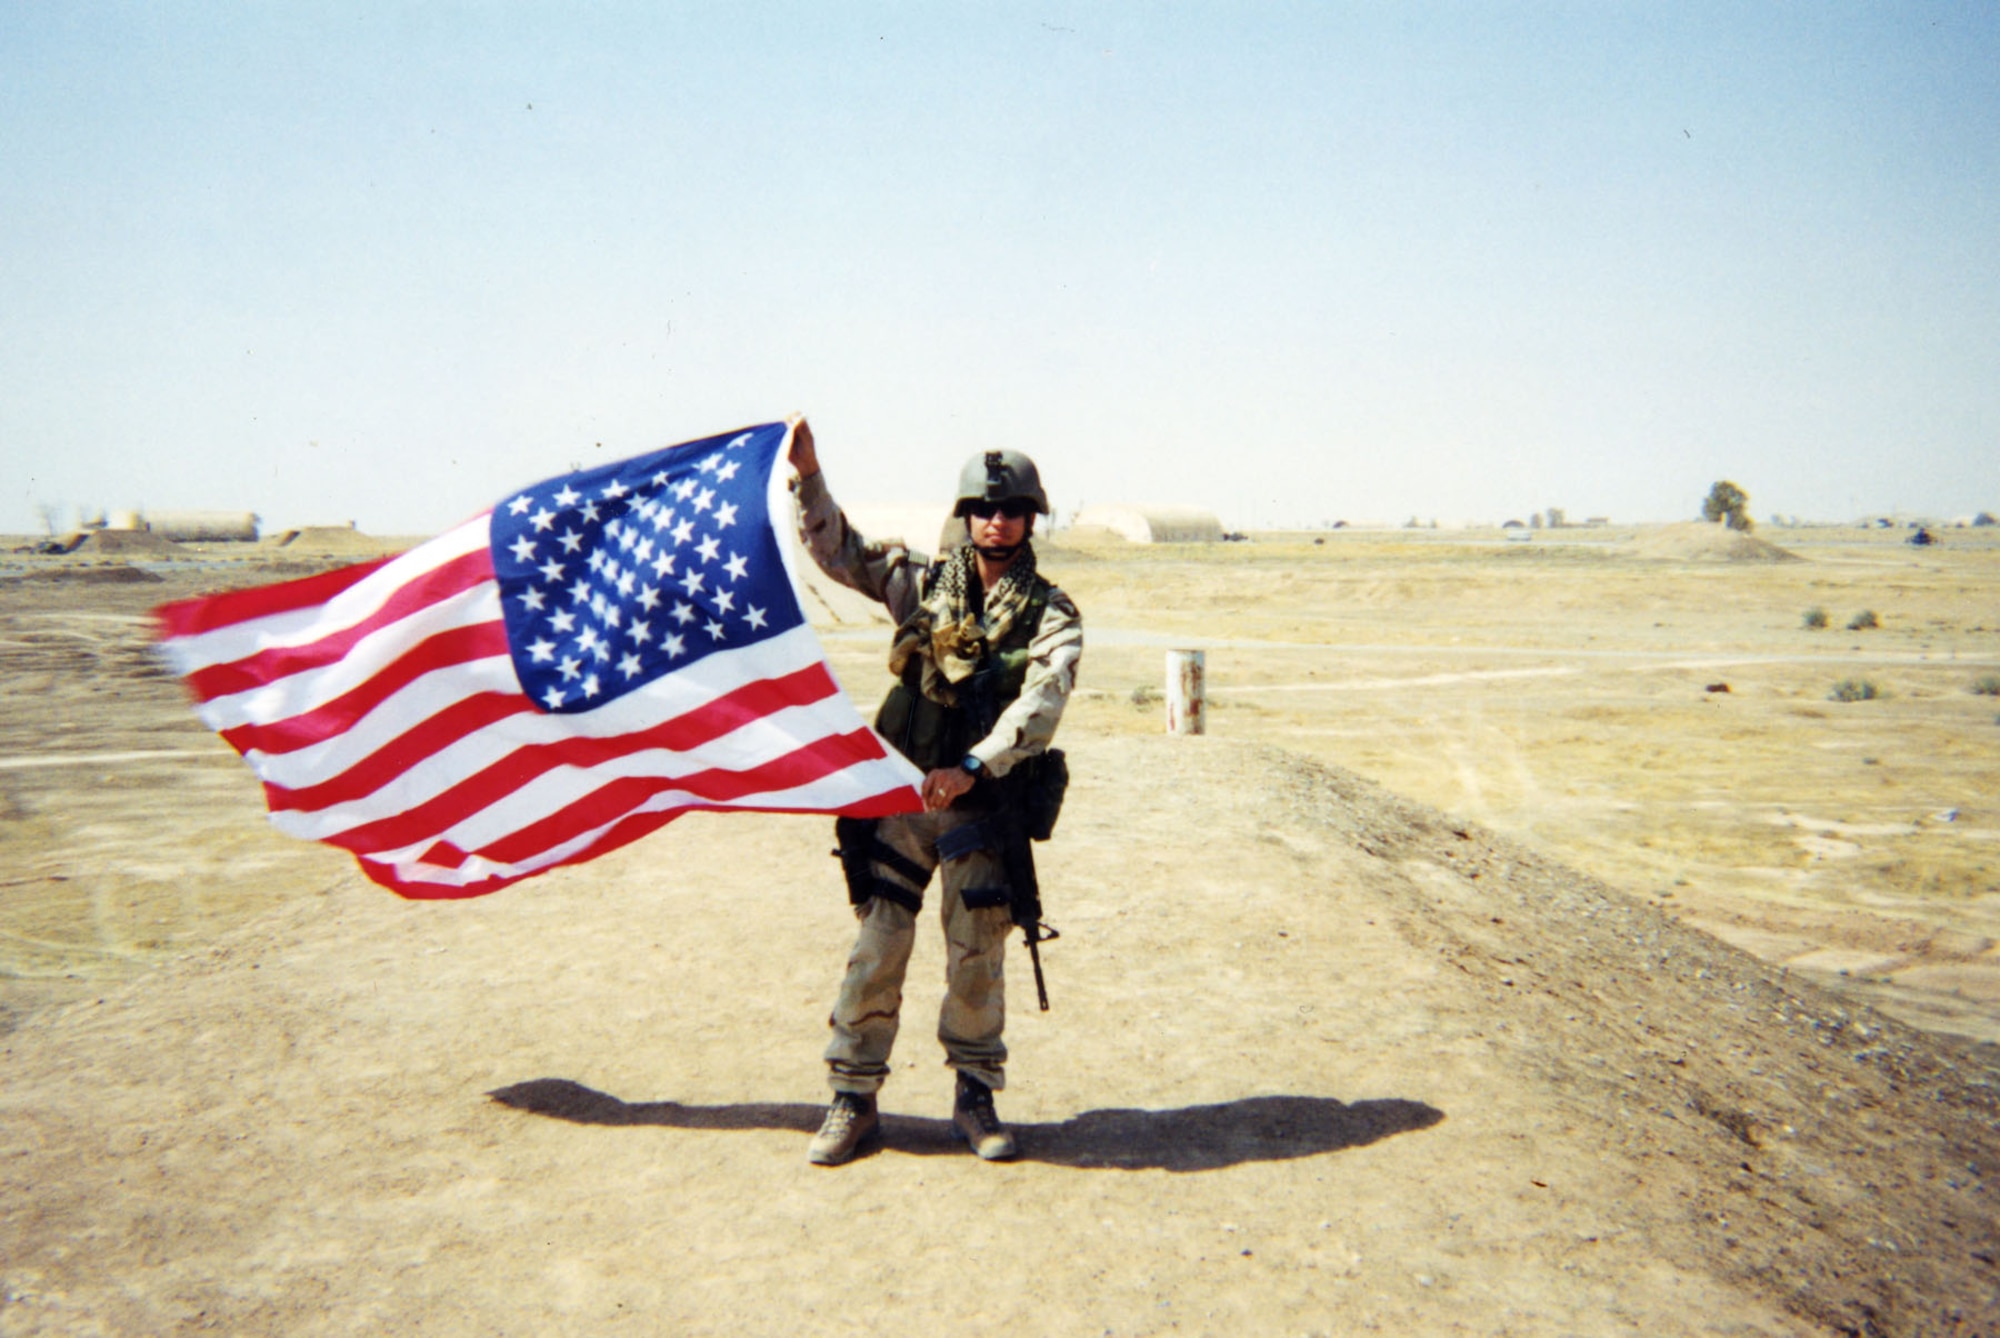 Staff Sgt. Sean Bailey waving a U.S. flag at “Q-West” (Qayyarah Airfield West), about 180 miles north of Baghdad. Bailey served two tours as a JTAC in Iraq. (U.S. Air Force photo)